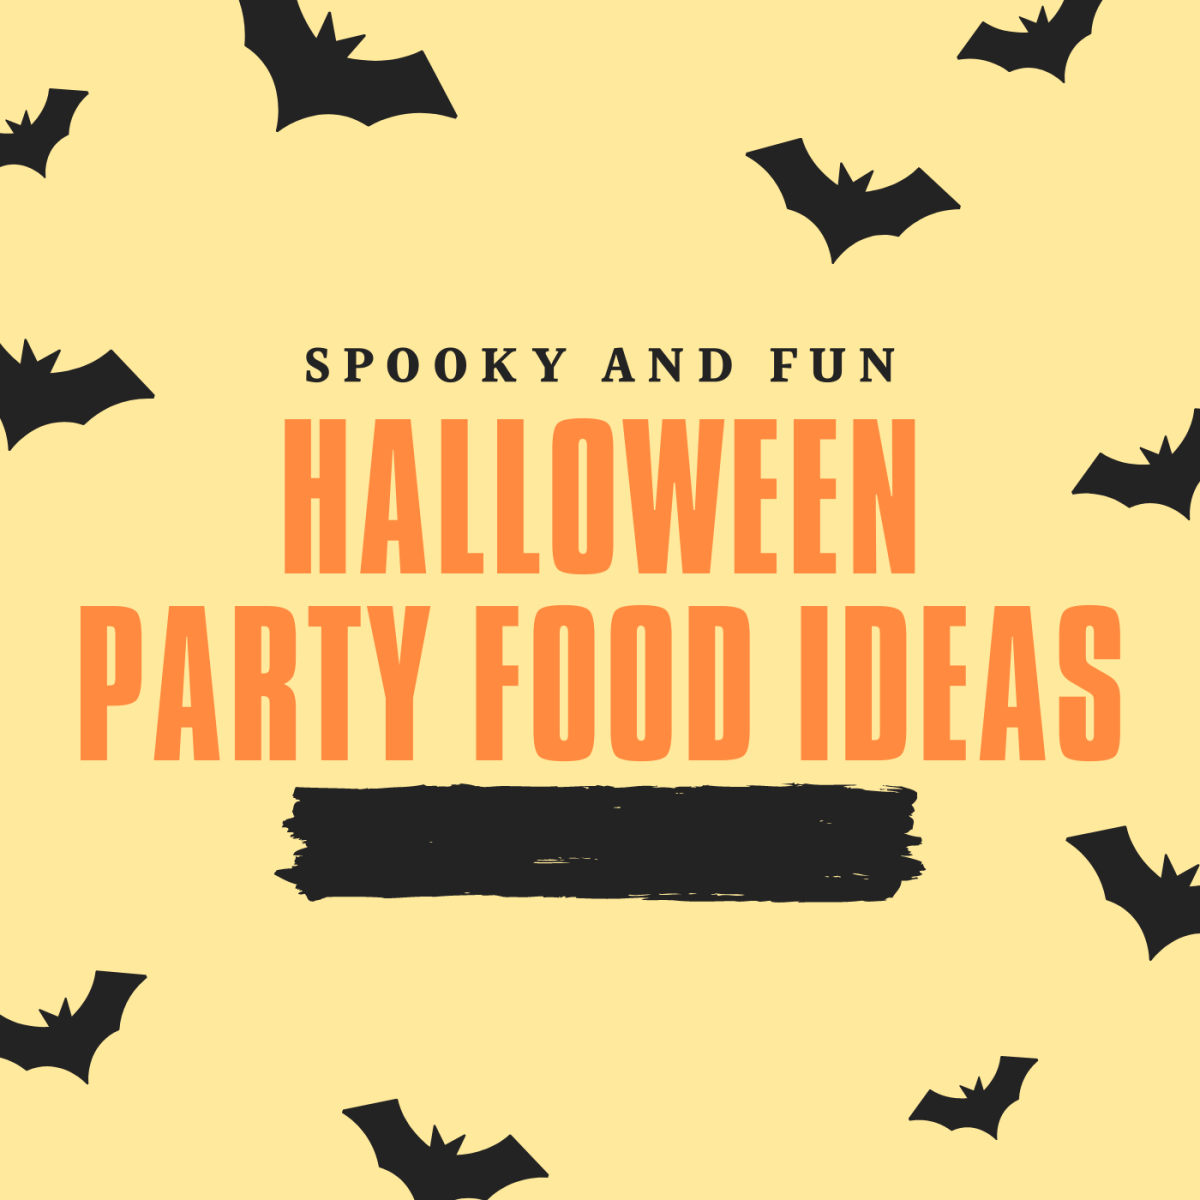 30+ Spooky and Fun Halloween Party Food Ideas to Bewitch Your Guests